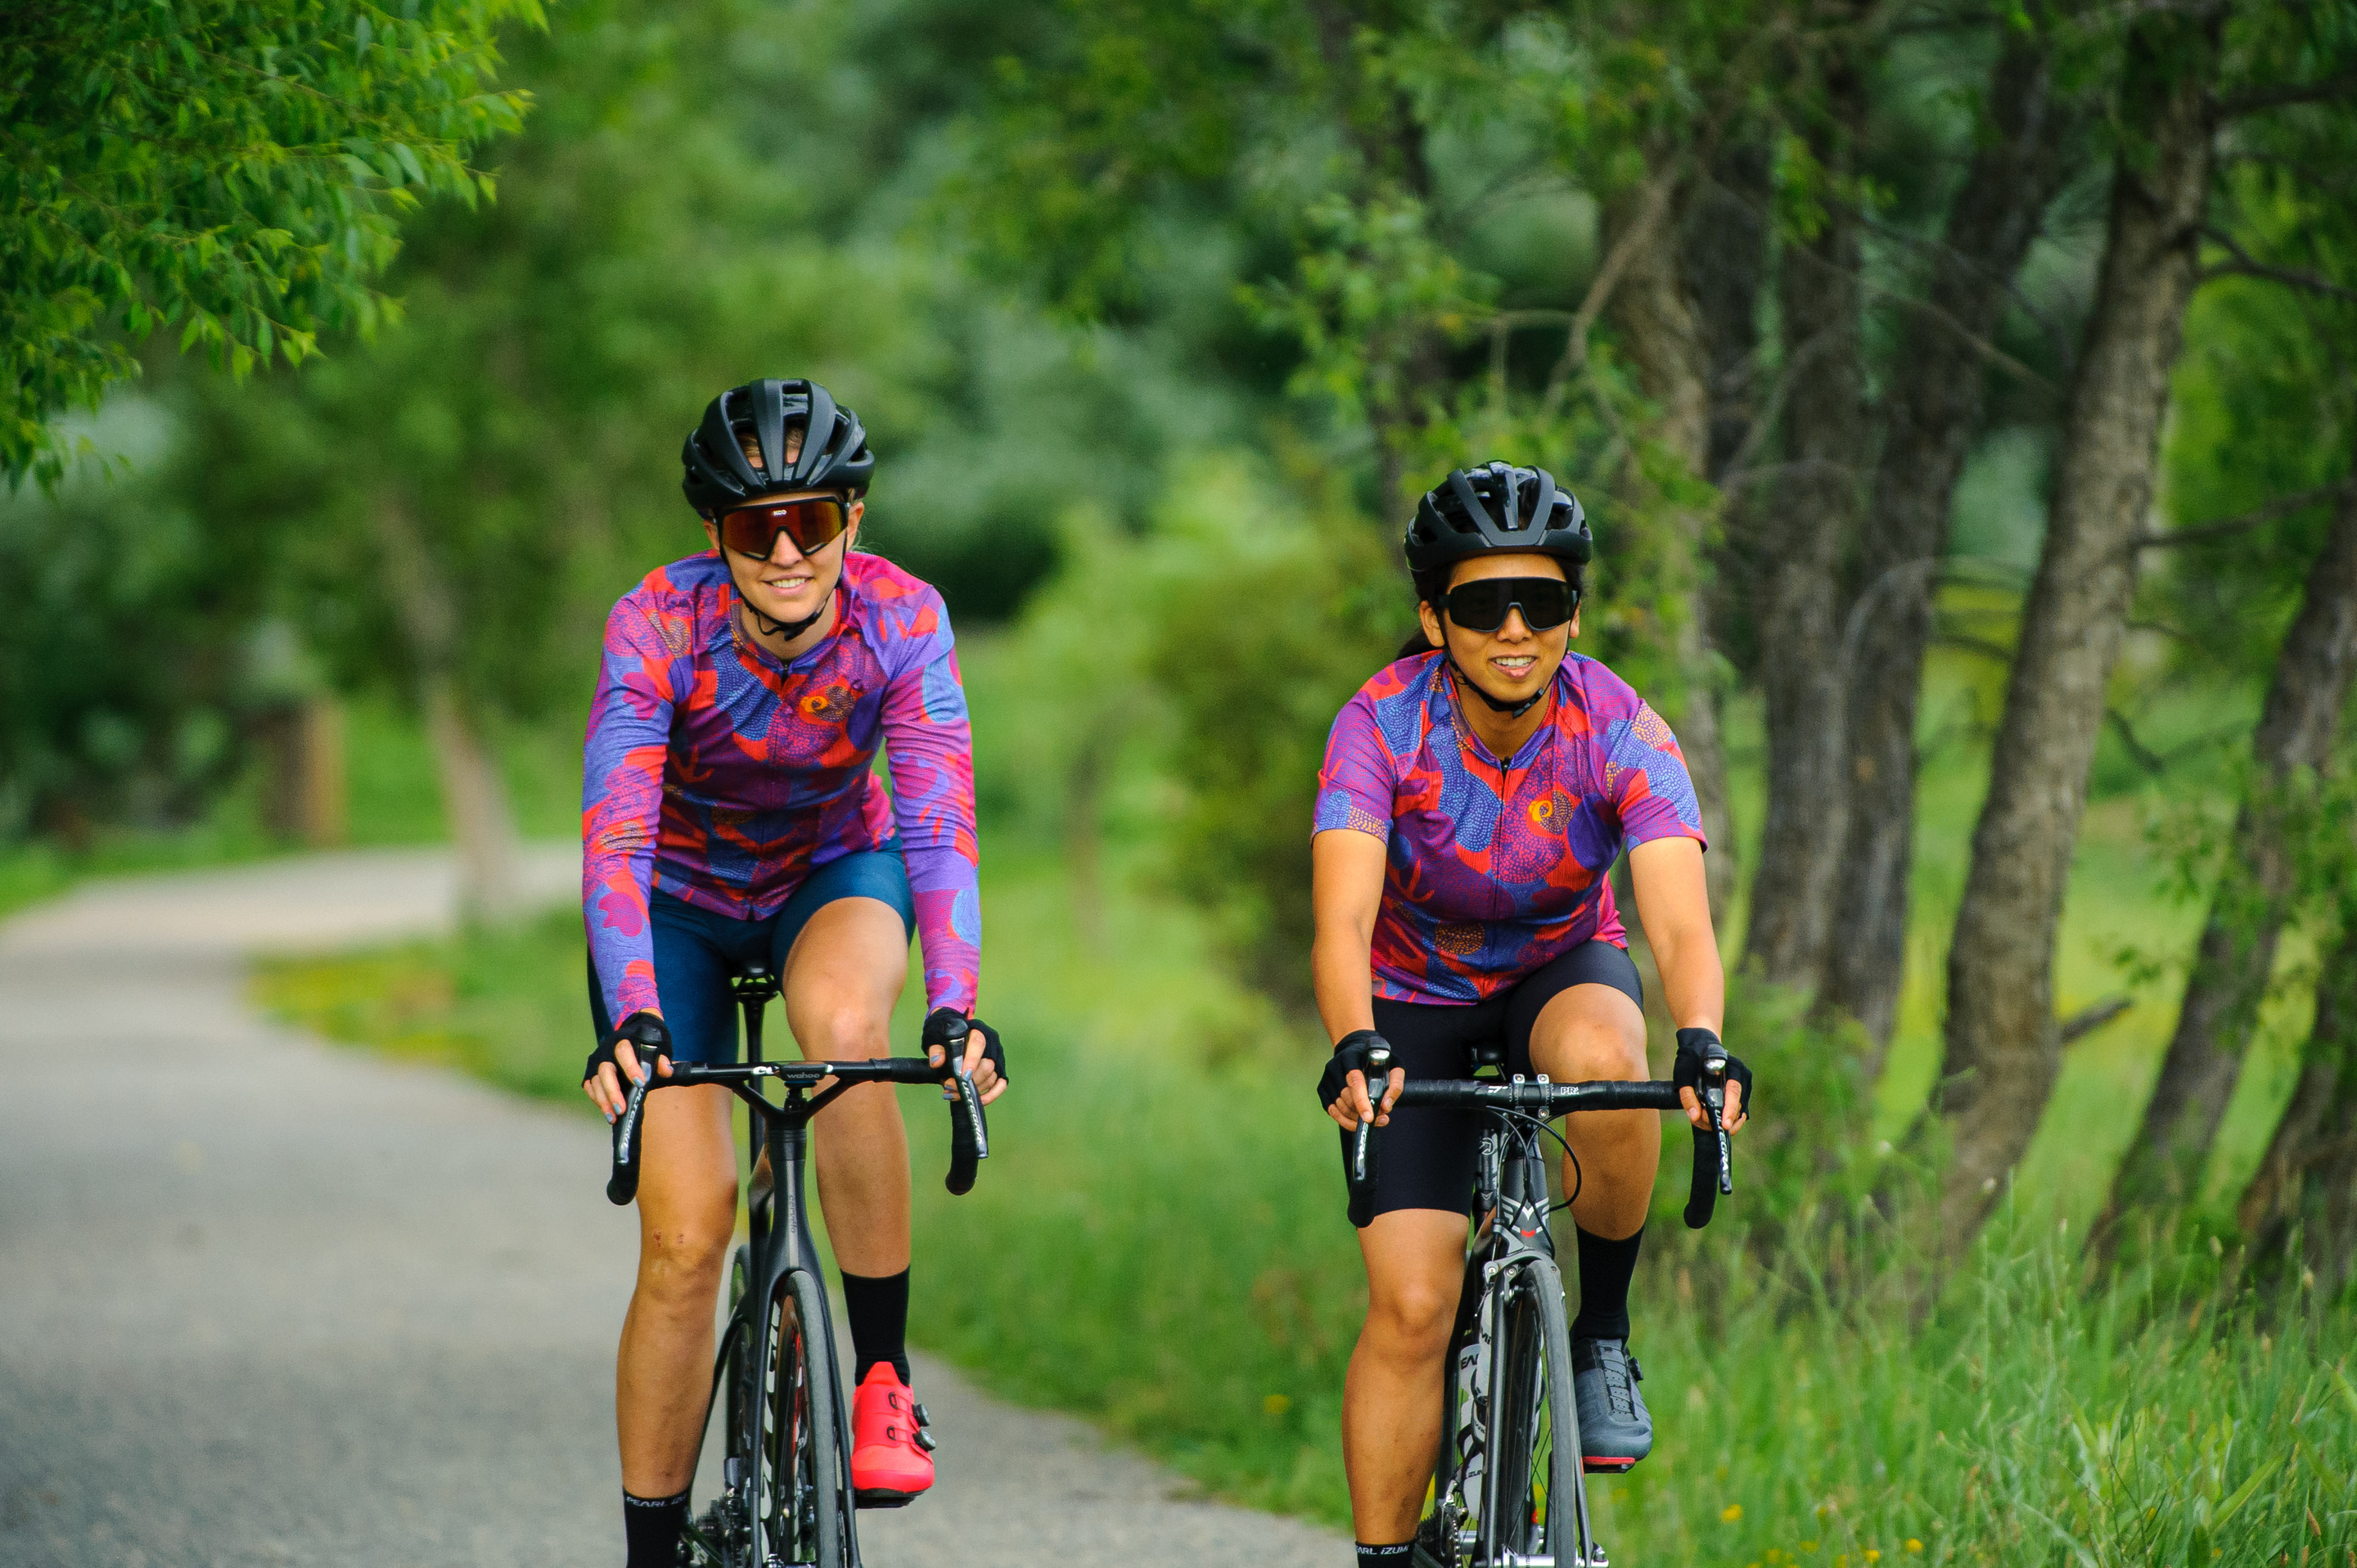 Shop All Womens Clearance Cycling Gear